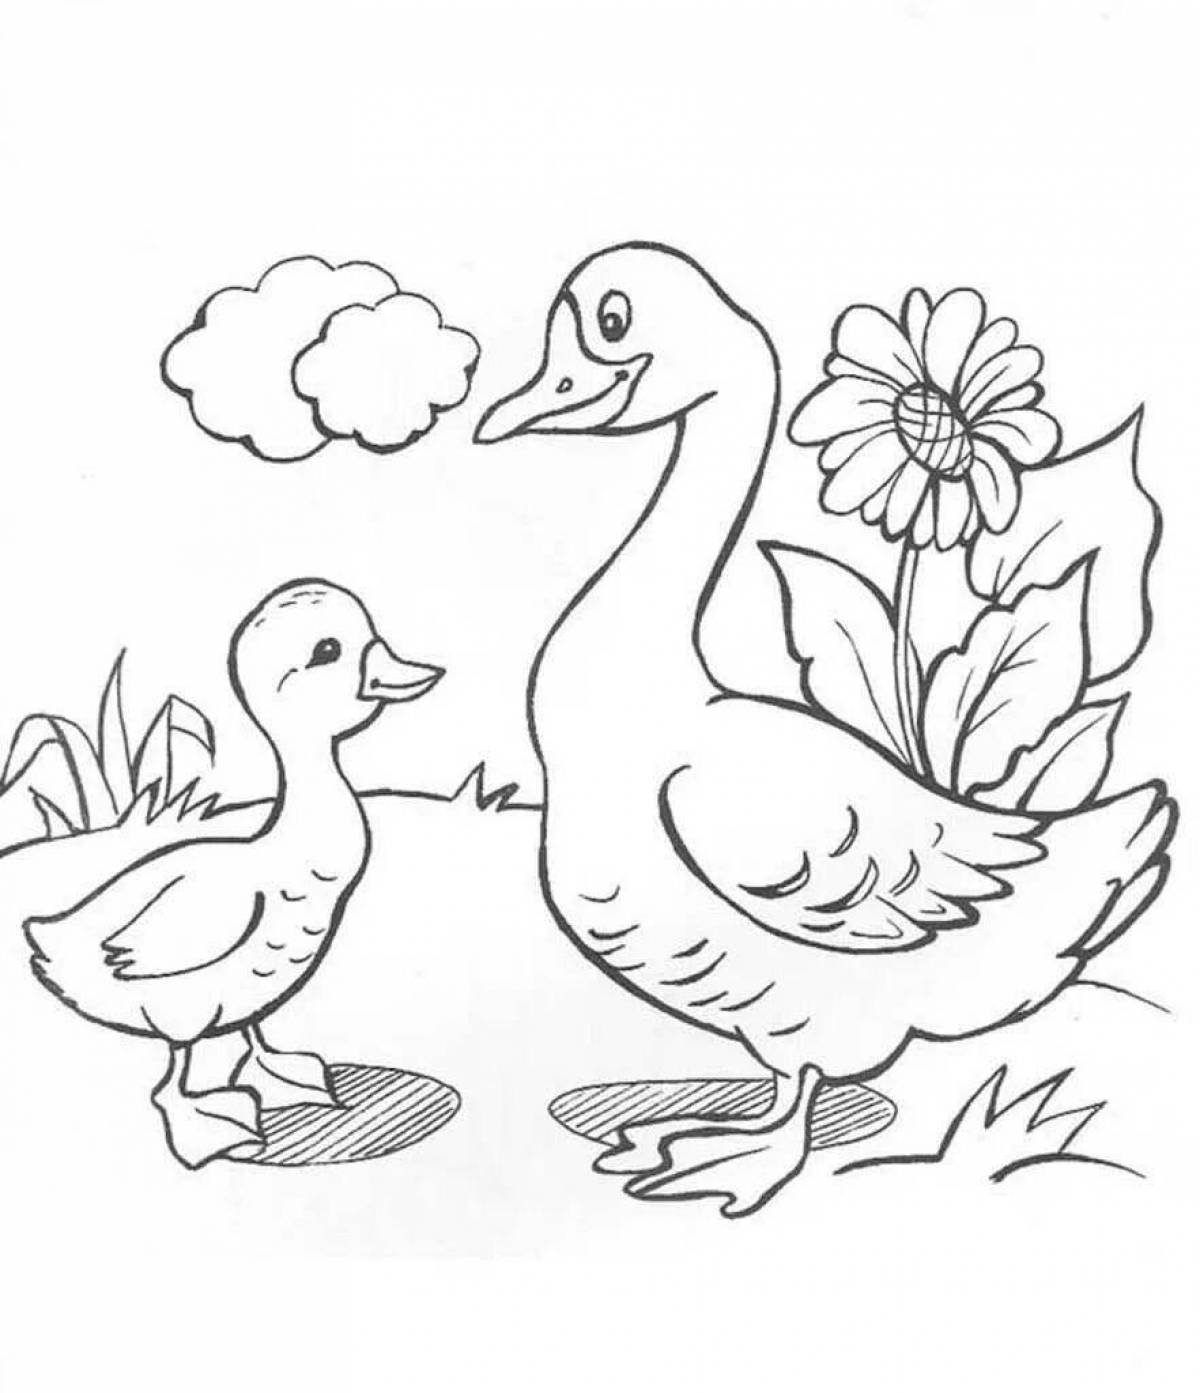 Magic bird coloring pages for kids